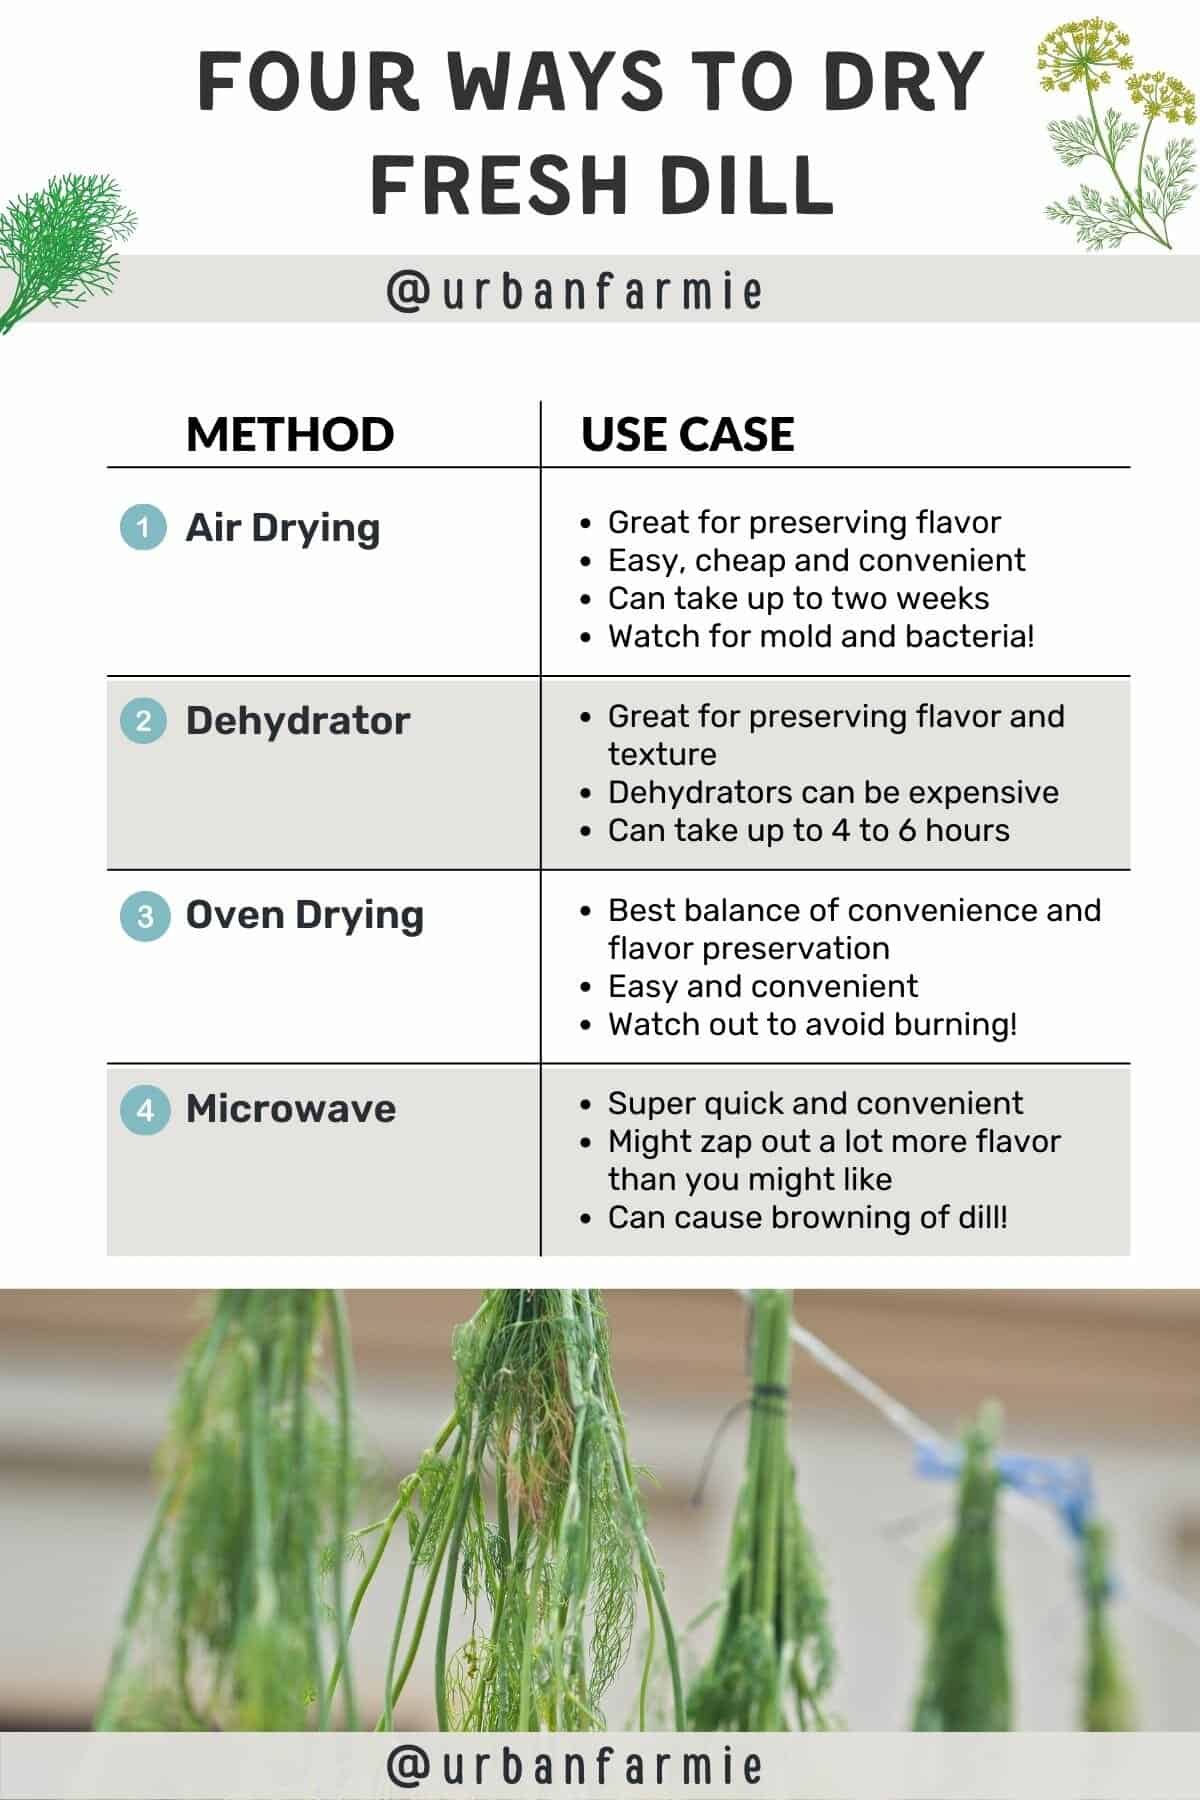 Infographic in table format summarizing the four ways to dry dill and their use cases, and some background images of dill. Check post for details.